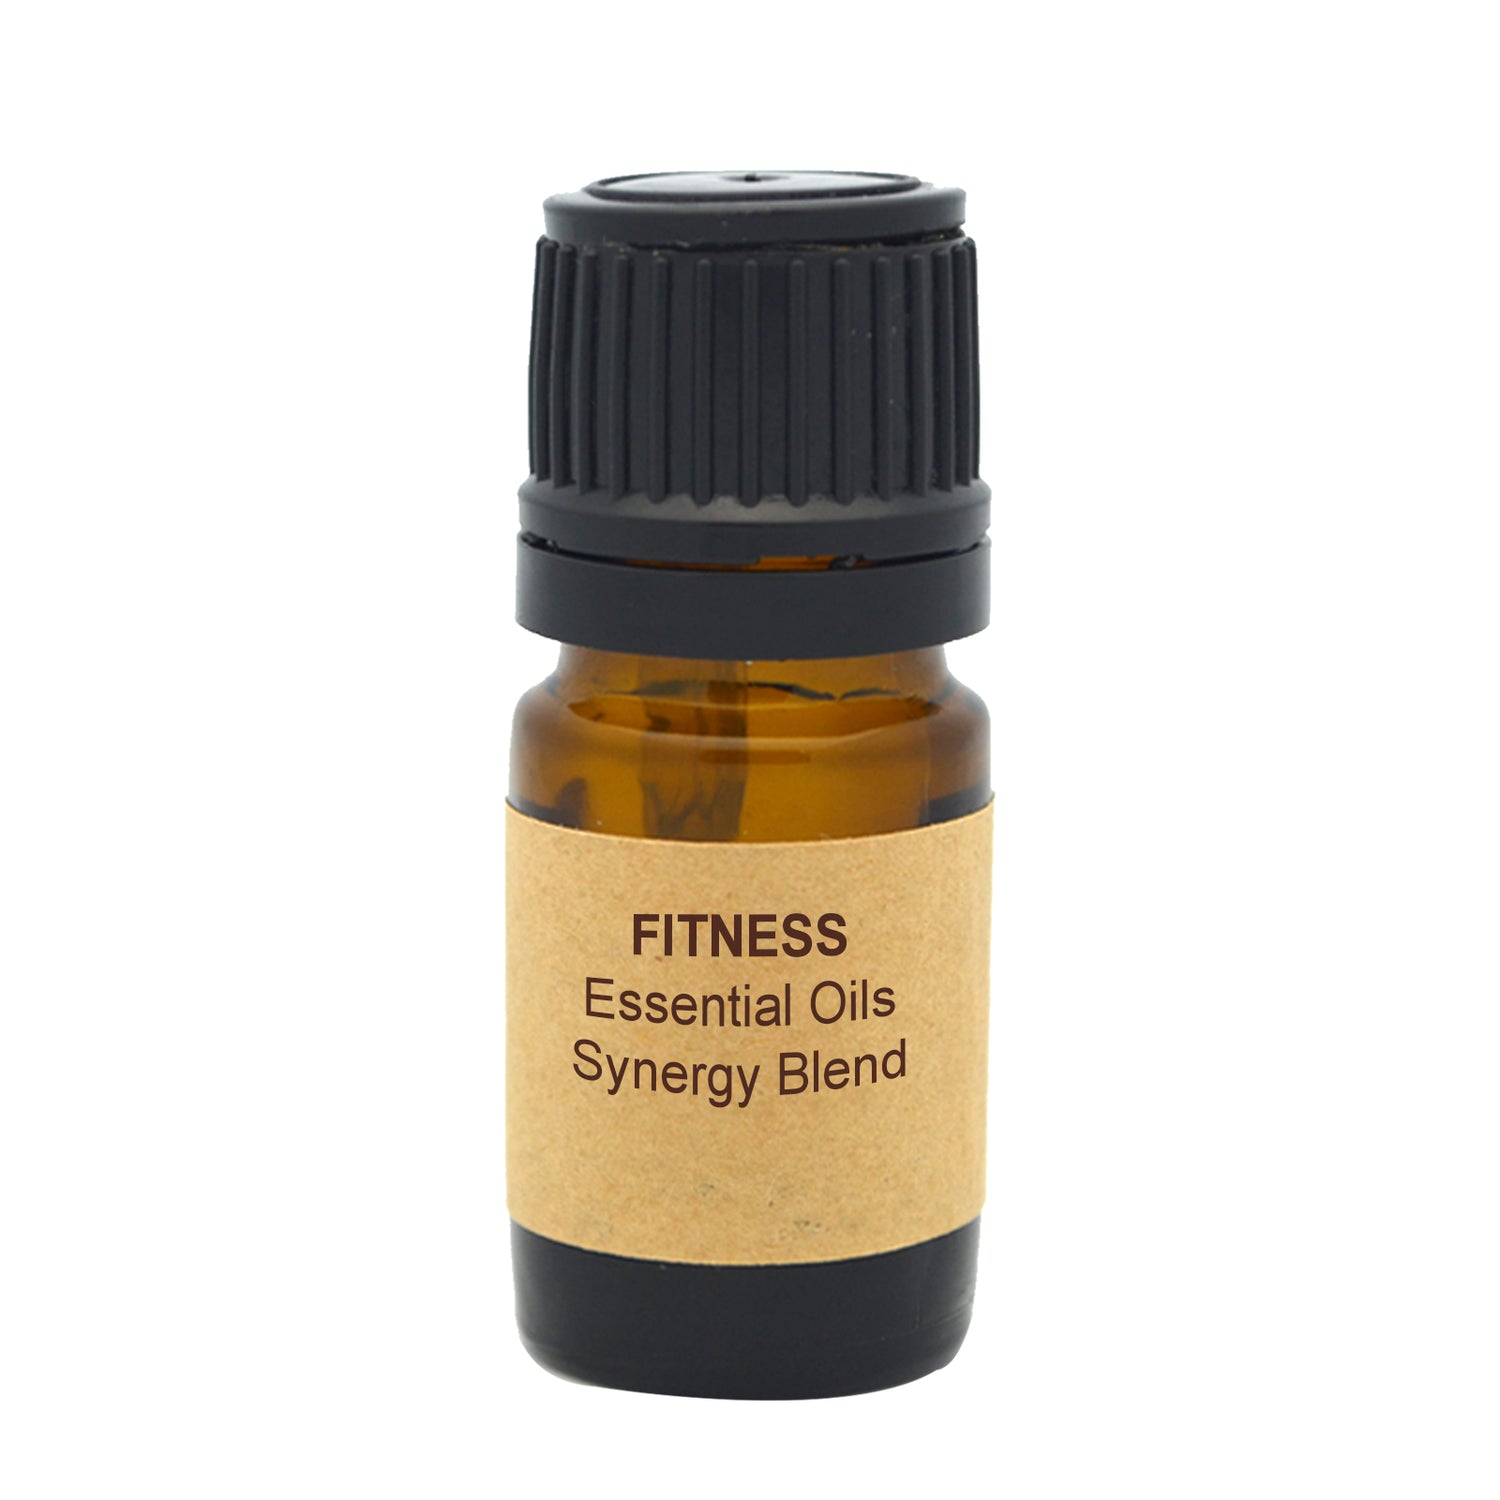 Fitness Essential Oils Synergy Blend.